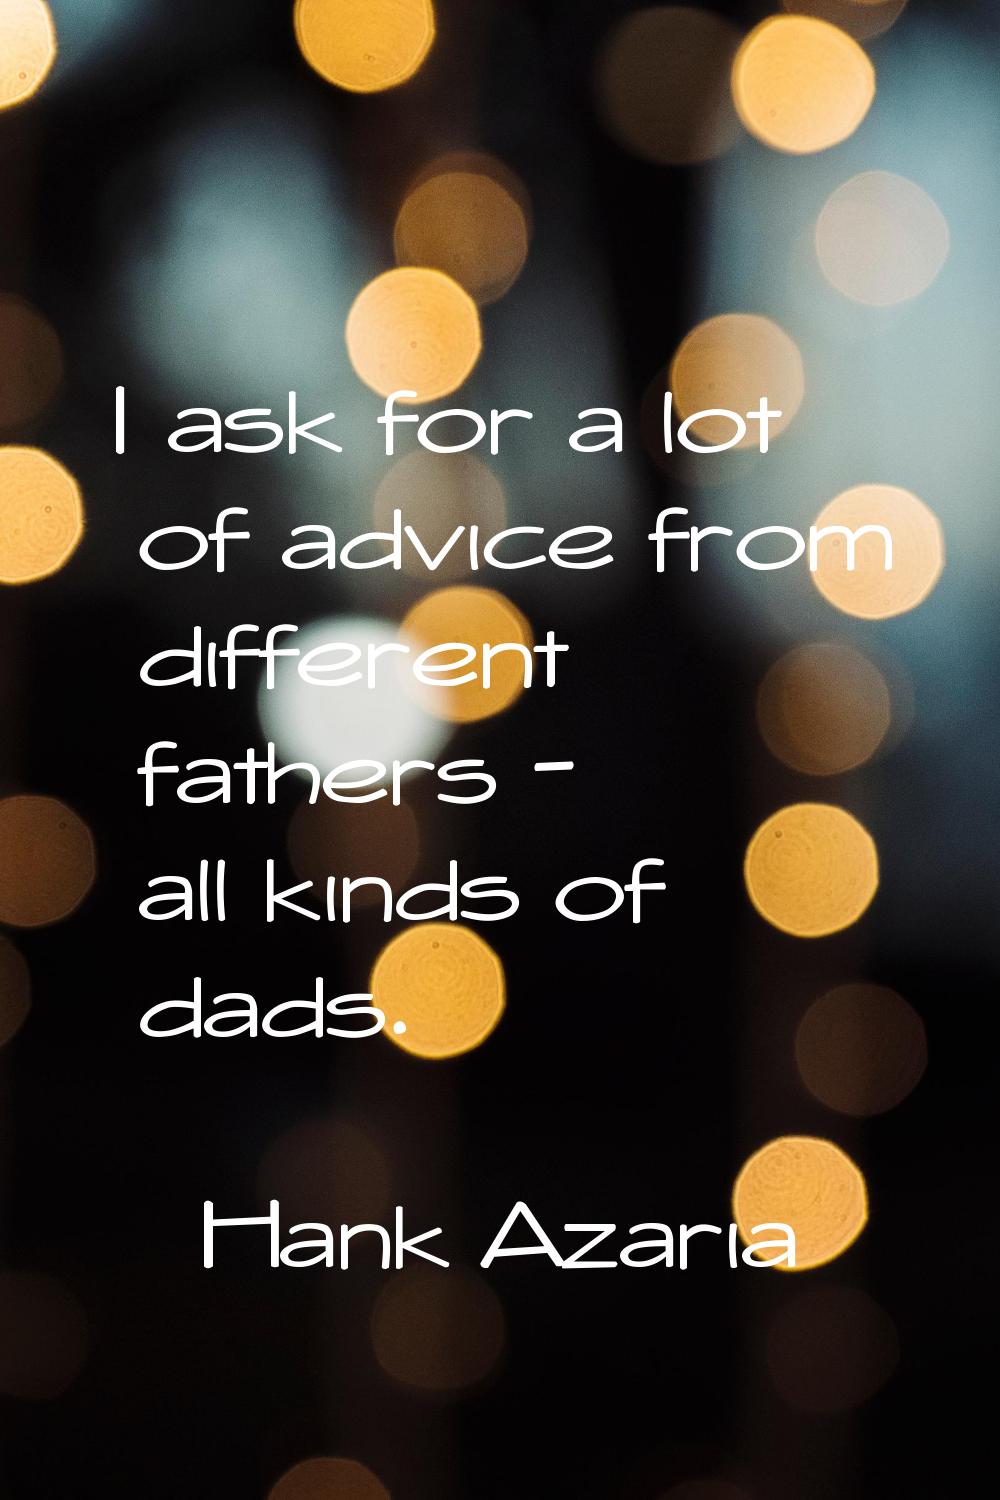 I ask for a lot of advice from different fathers - all kinds of dads.